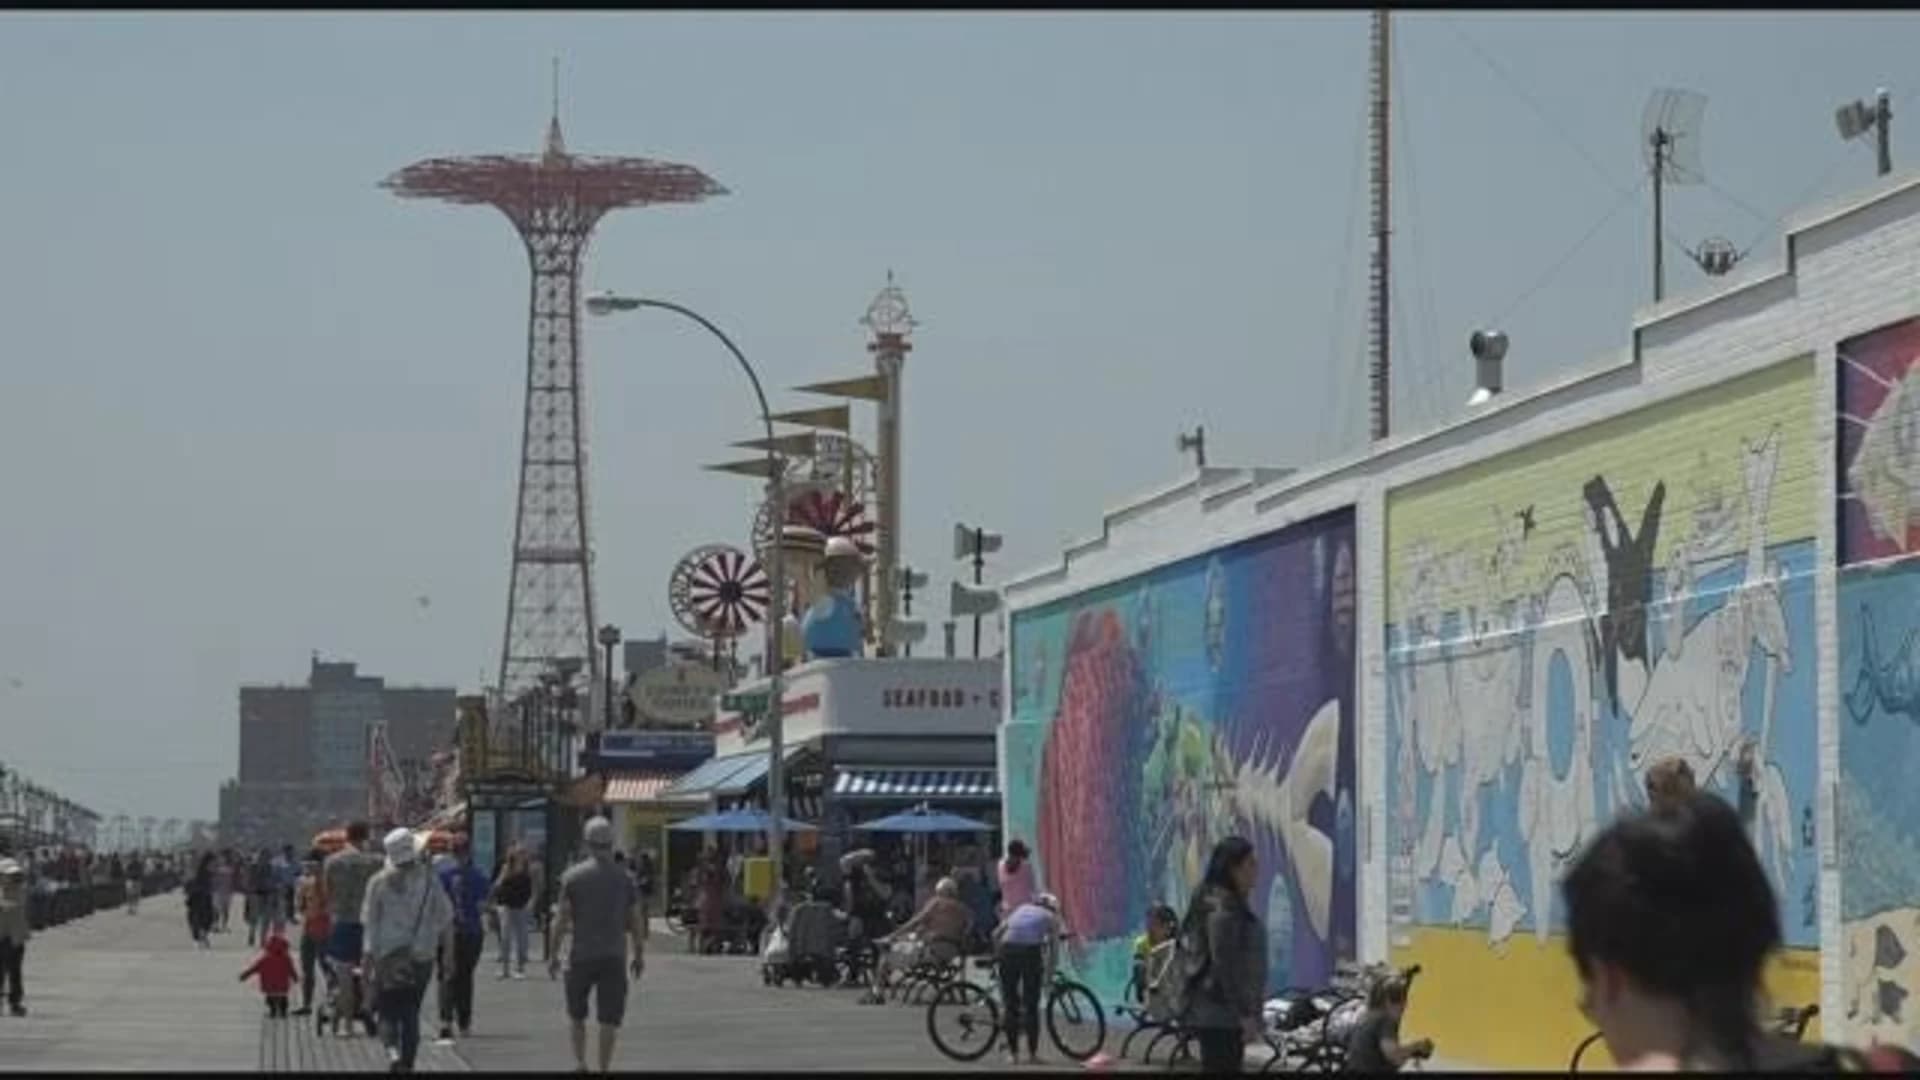 Free seaside Coney Island concerts to continue through 2025